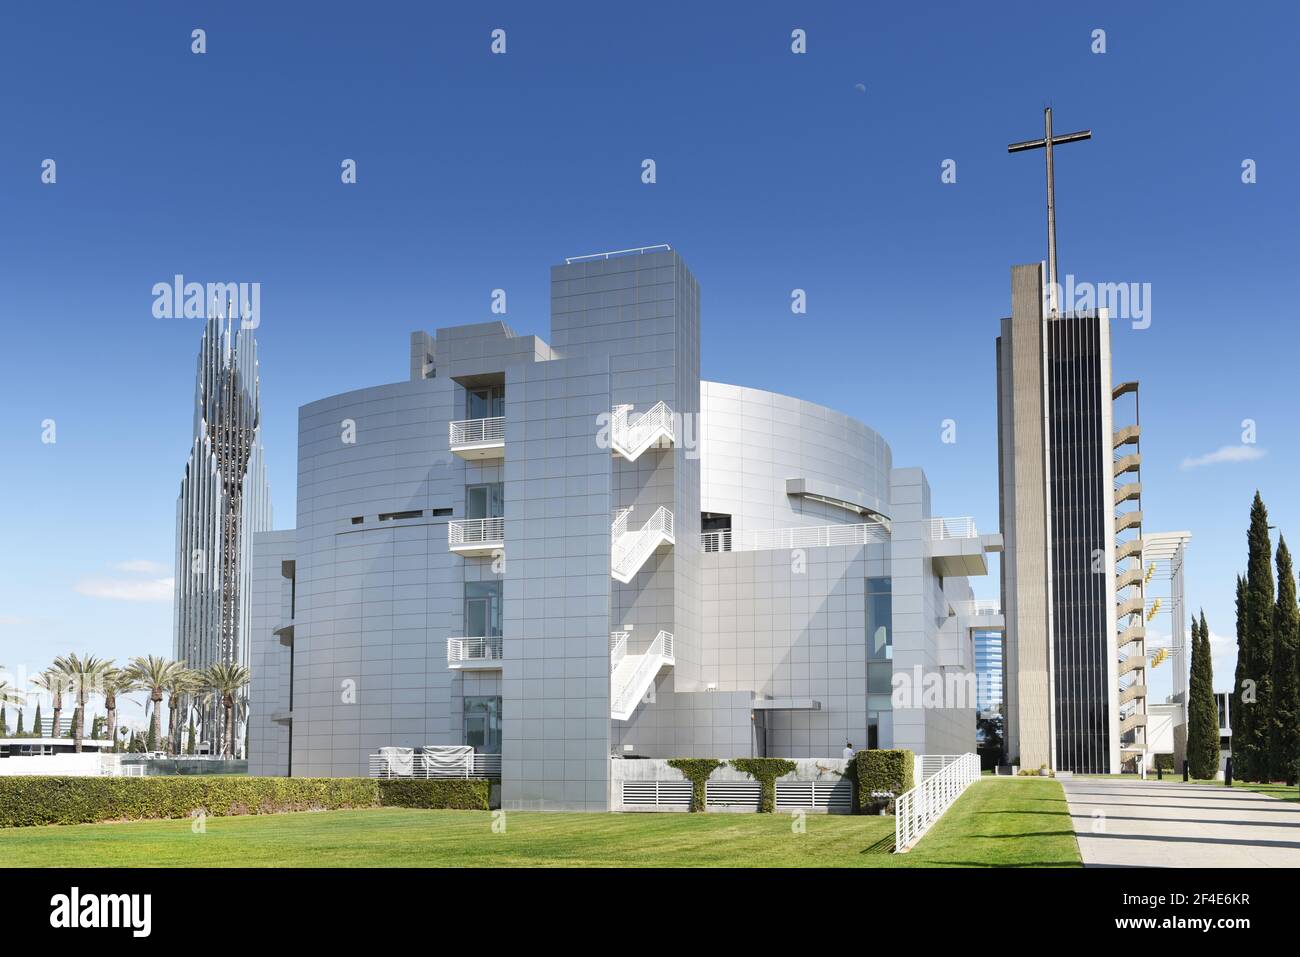 GARDEN GROVE, CALIFORNIA - 20 MAR 2021: Cultural Center at the Crystal Cathedral flanked by the Bell Tower and Tower of Hope. Stock Photo